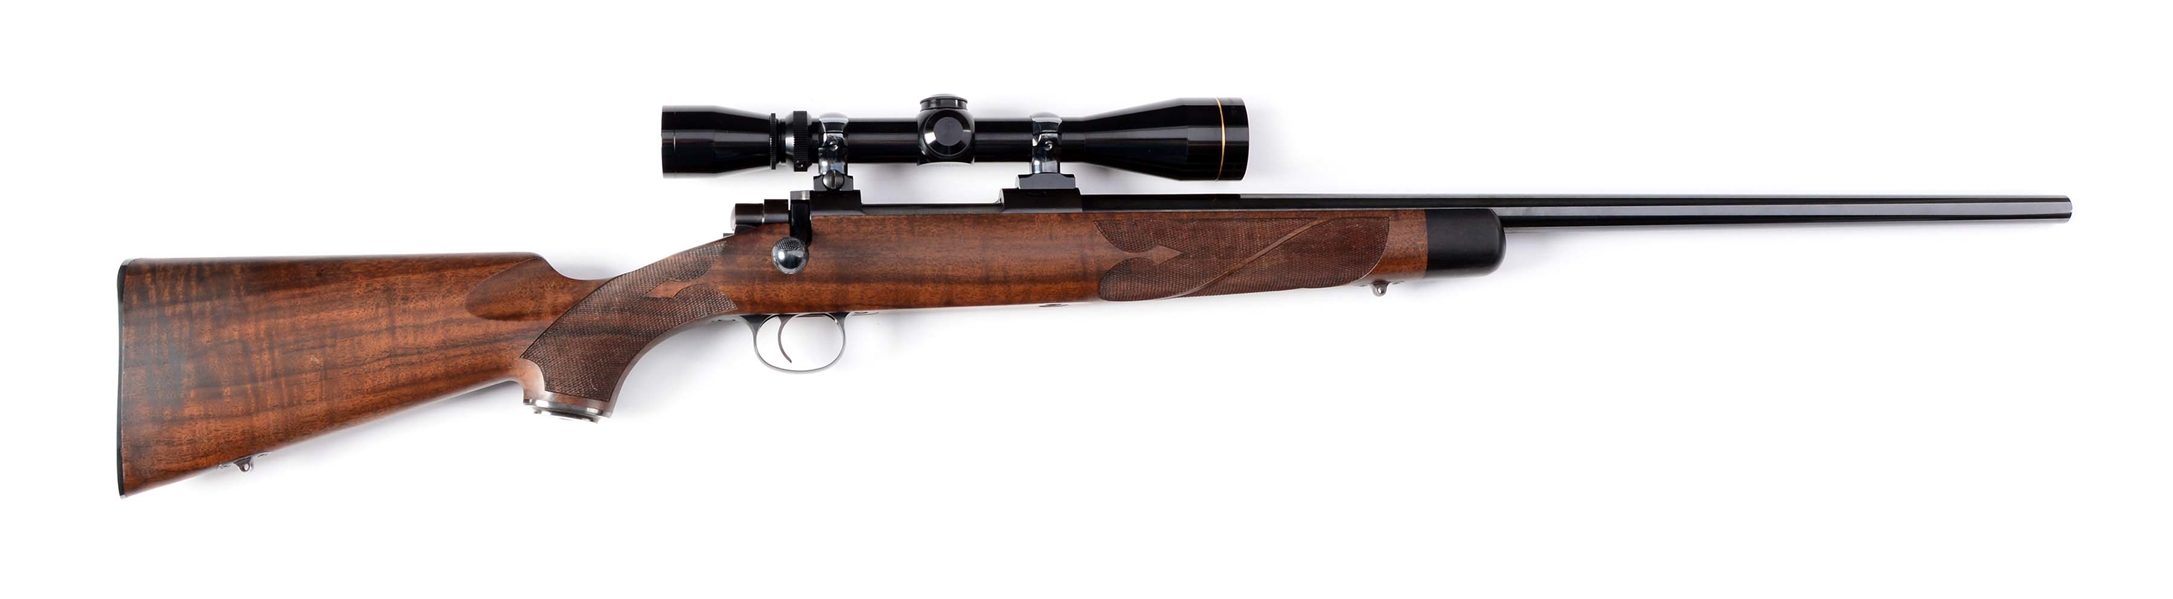 (M) COOPER FIREARMS MODEL 22 CUSTOM CLASSIC RIFLE WITH SCOPE.